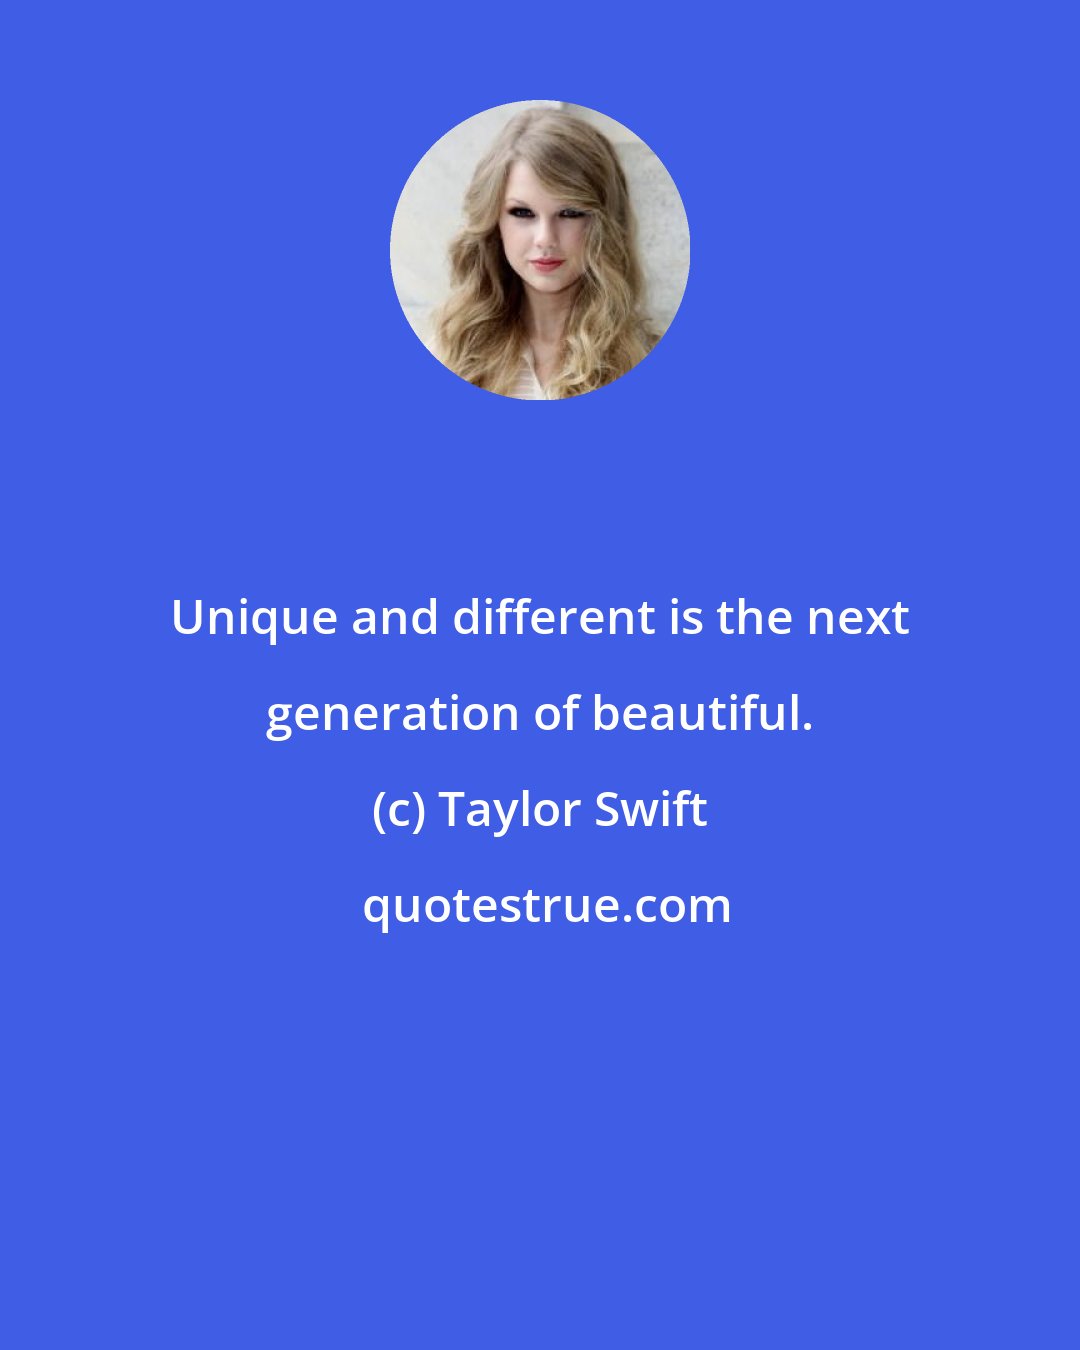 Taylor Swift: Unique and different is the next generation of beautiful.